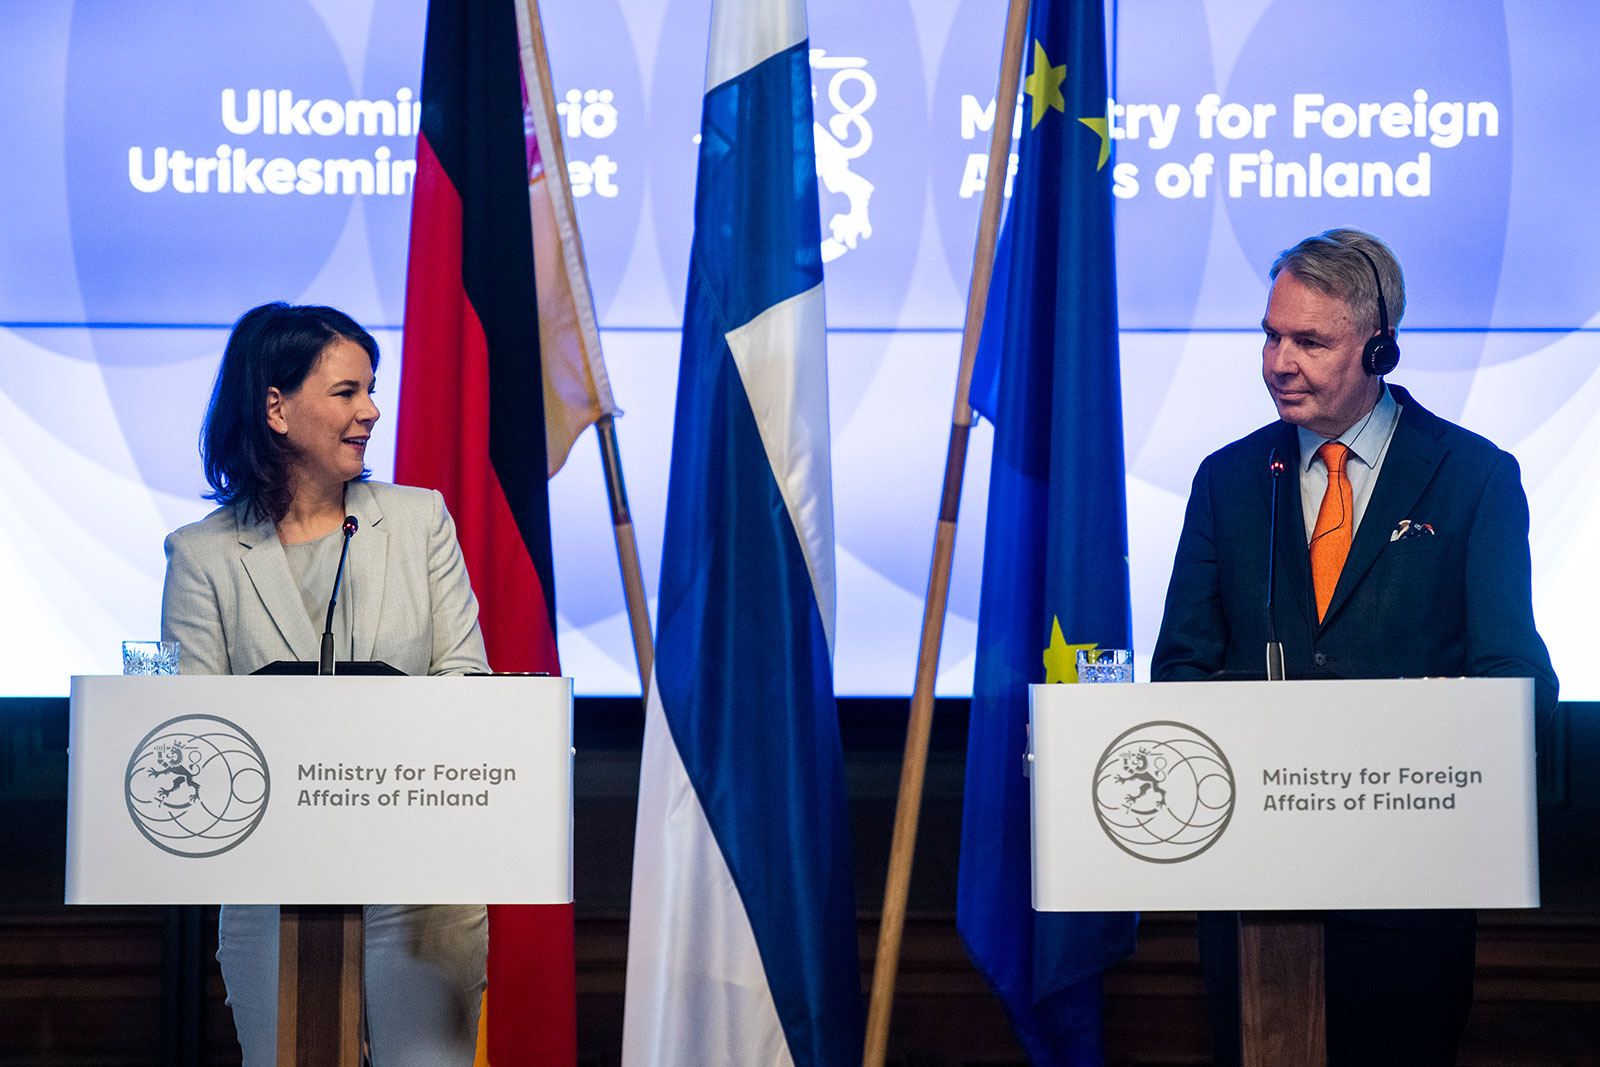 German Foreign Minister Annalena Baerbock and Finnish Foreign Minister Pekka Haavisto speak at a press conference in Helsinki, Finland, on February 13. 